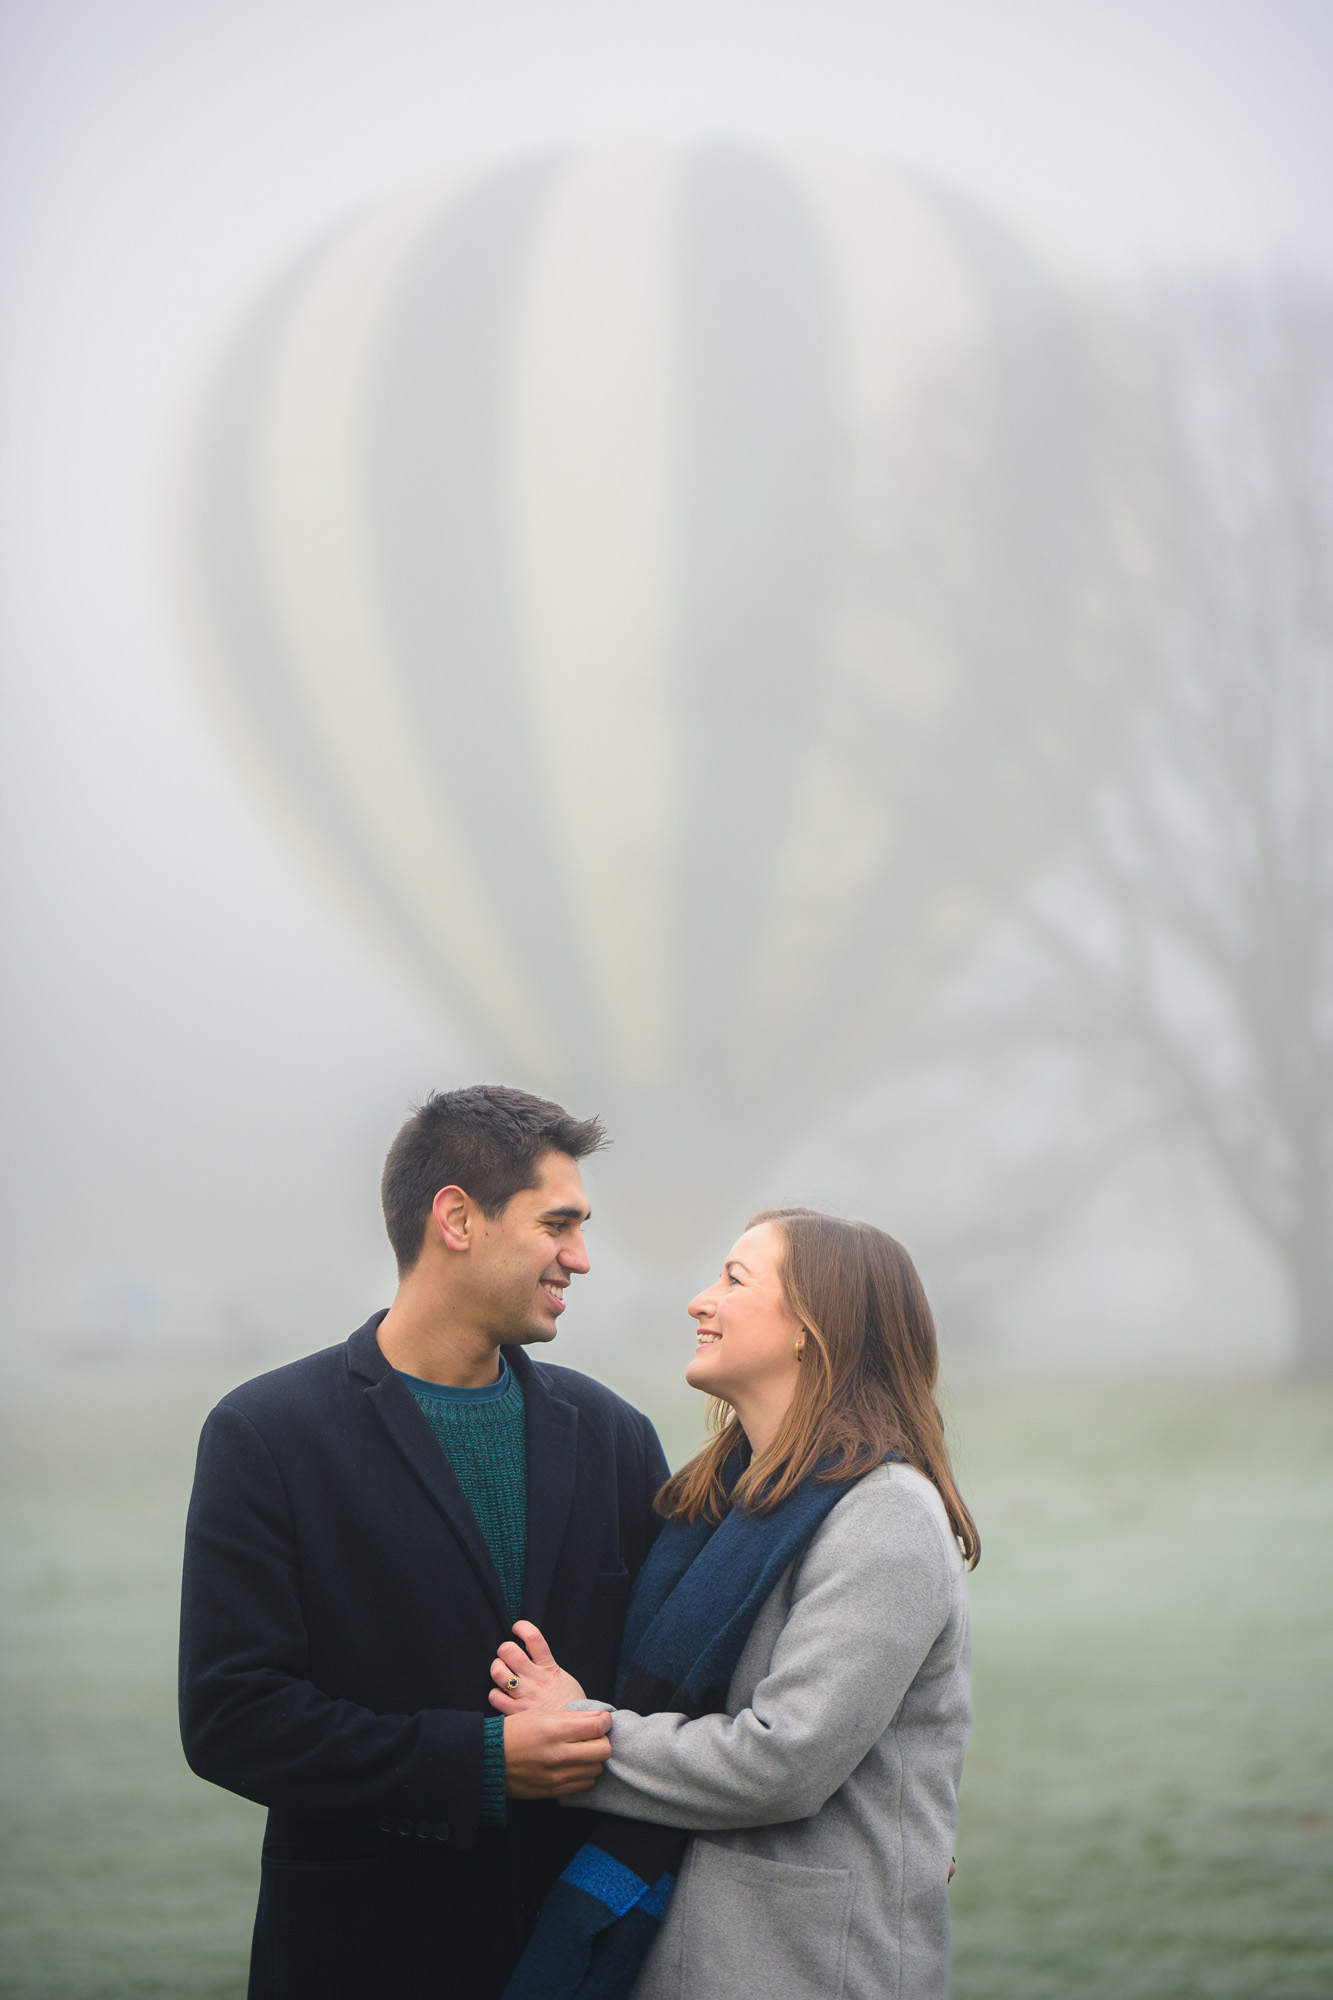 Engagement Photography Pre-Wedding Shoot Bristol with Hot Air Balloon